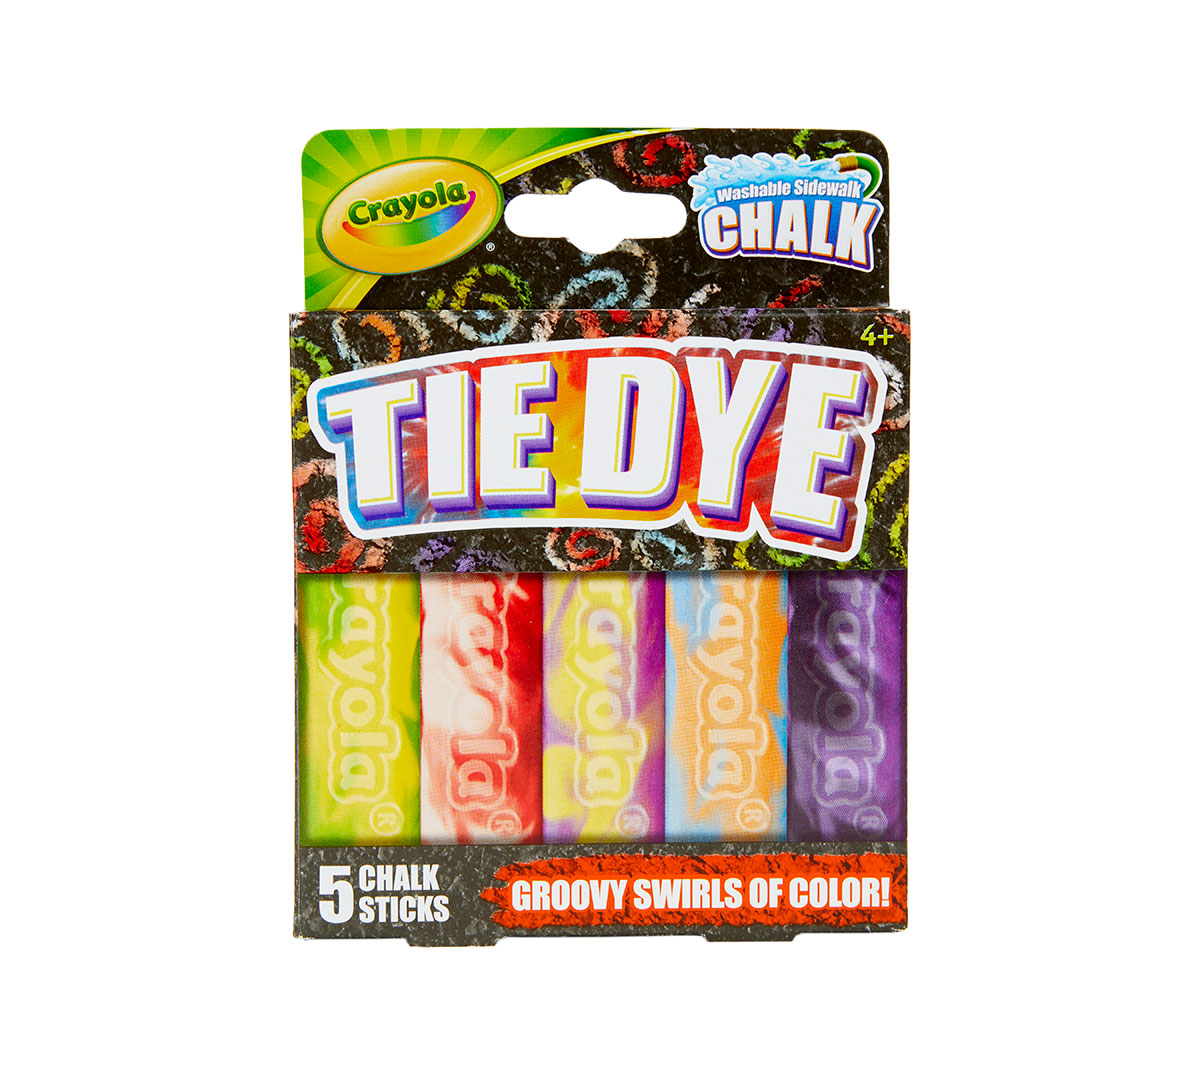 Crayola Tie-dye chalk produces groovy color laydowns that are different every time! | Crayola